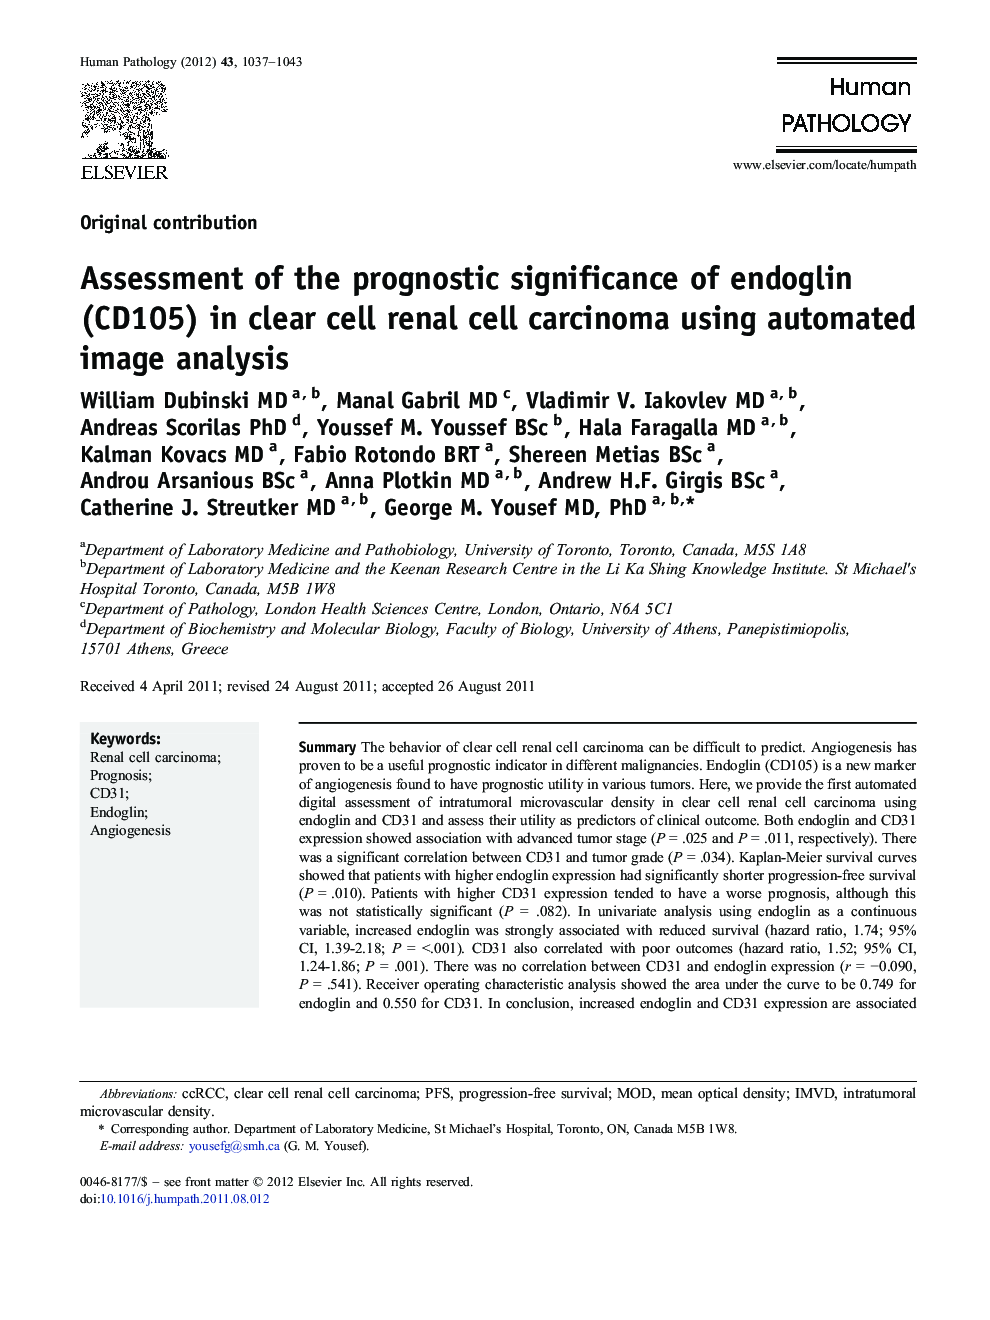 Assessment of the prognostic significance of endoglin (CD105) in clear cell renal cell carcinoma using automated image analysis